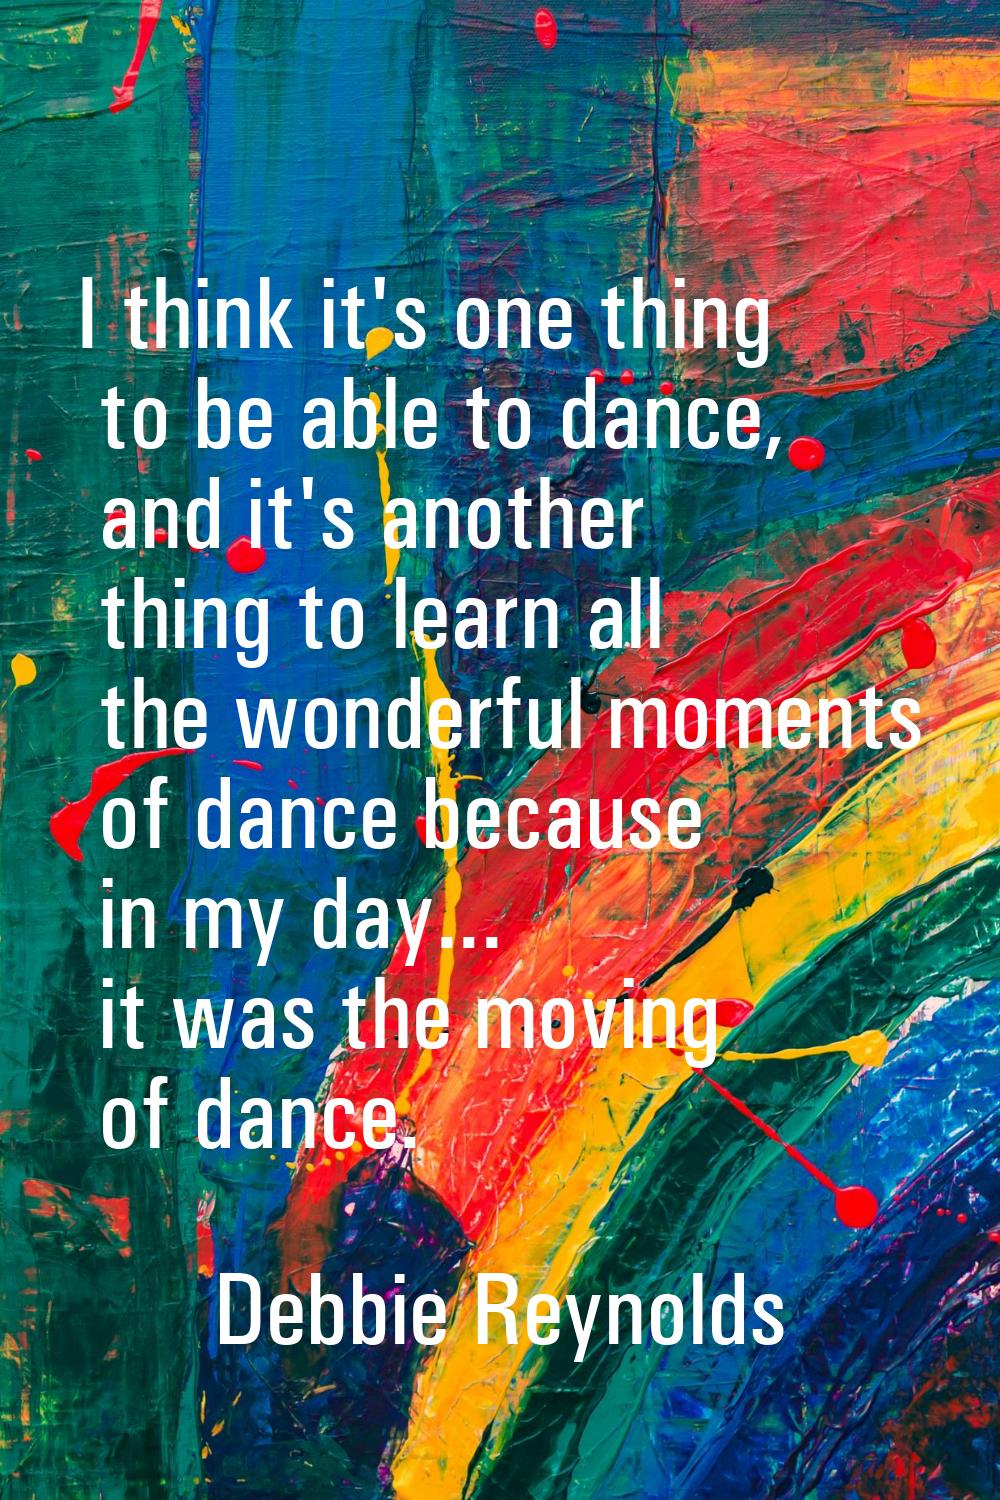 I think it's one thing to be able to dance, and it's another thing to learn all the wonderful momen